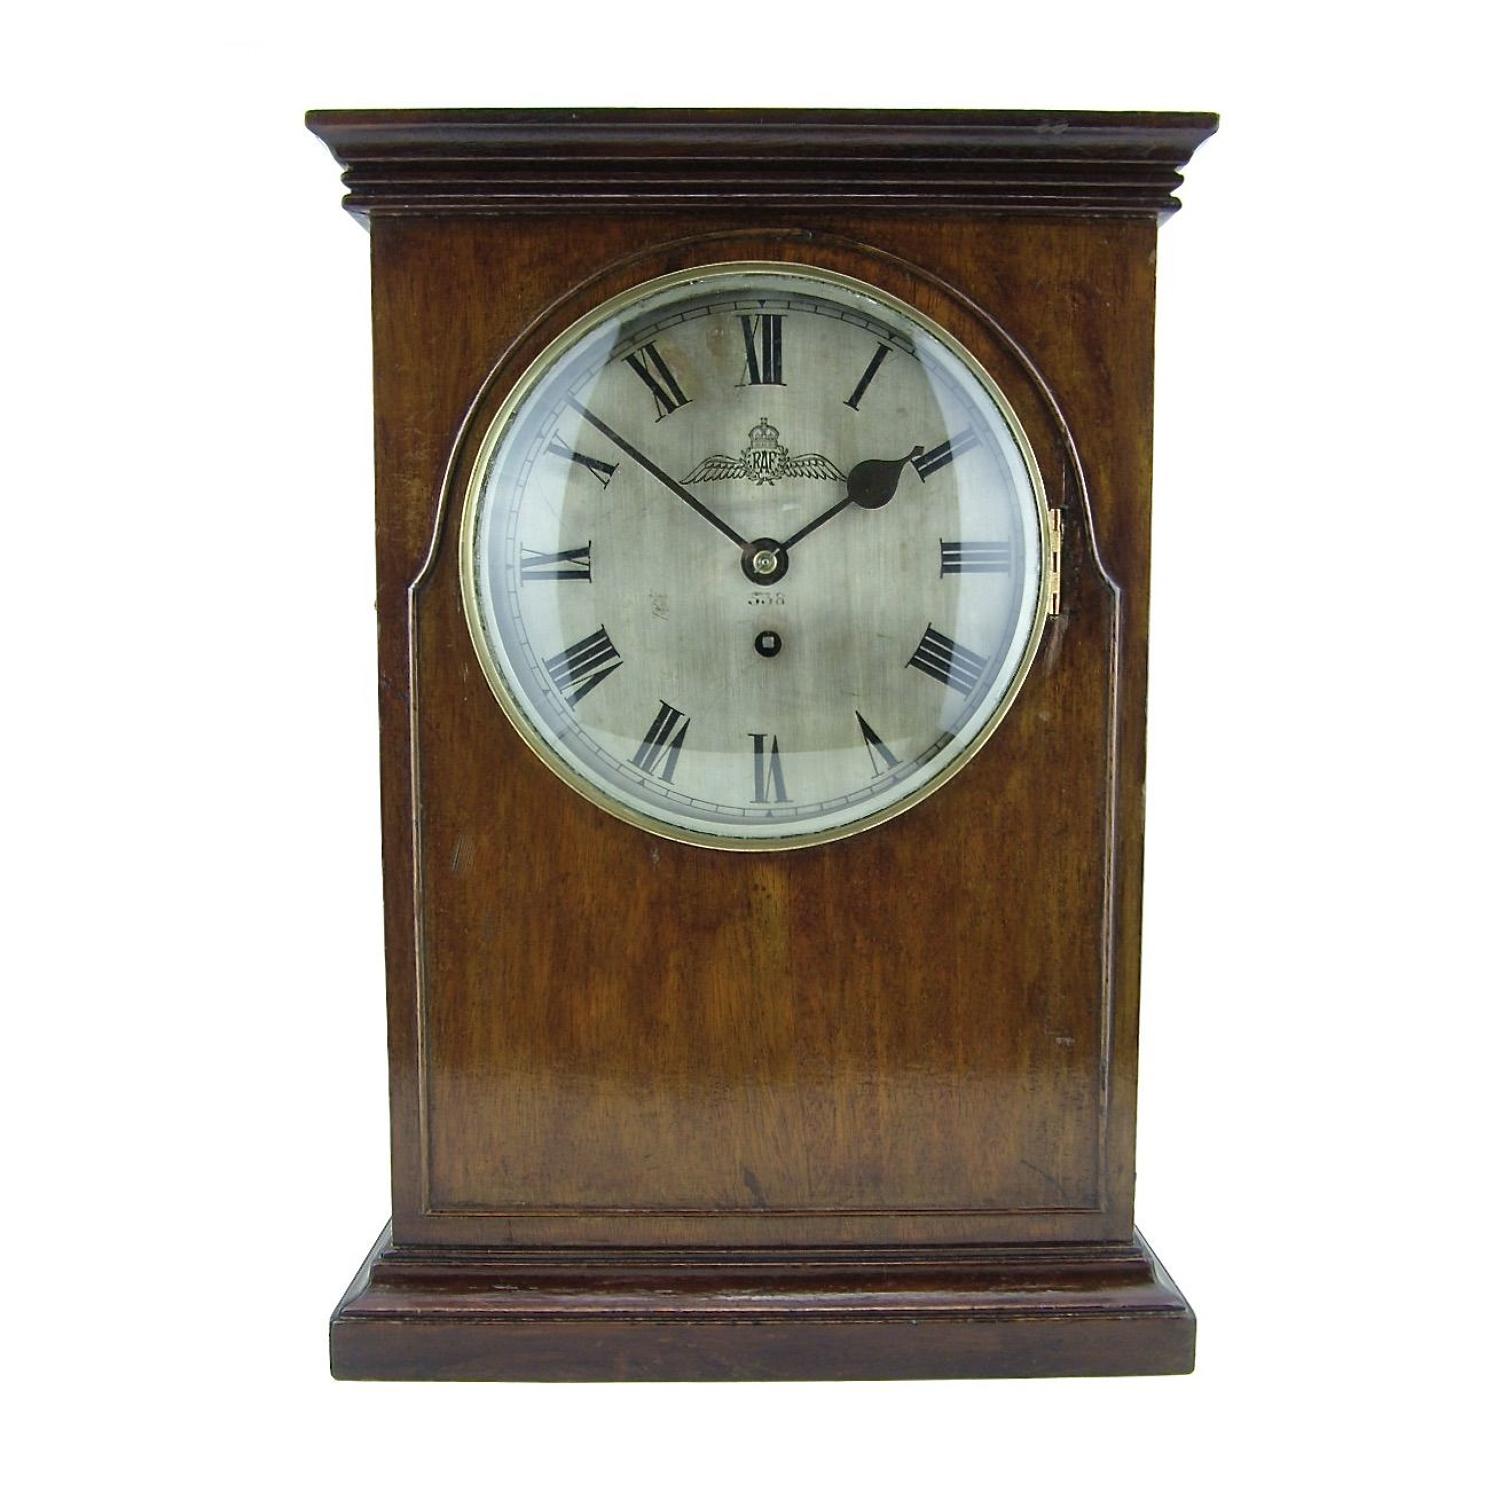 RAF mantle clock, large, rare dial and maker, 1929